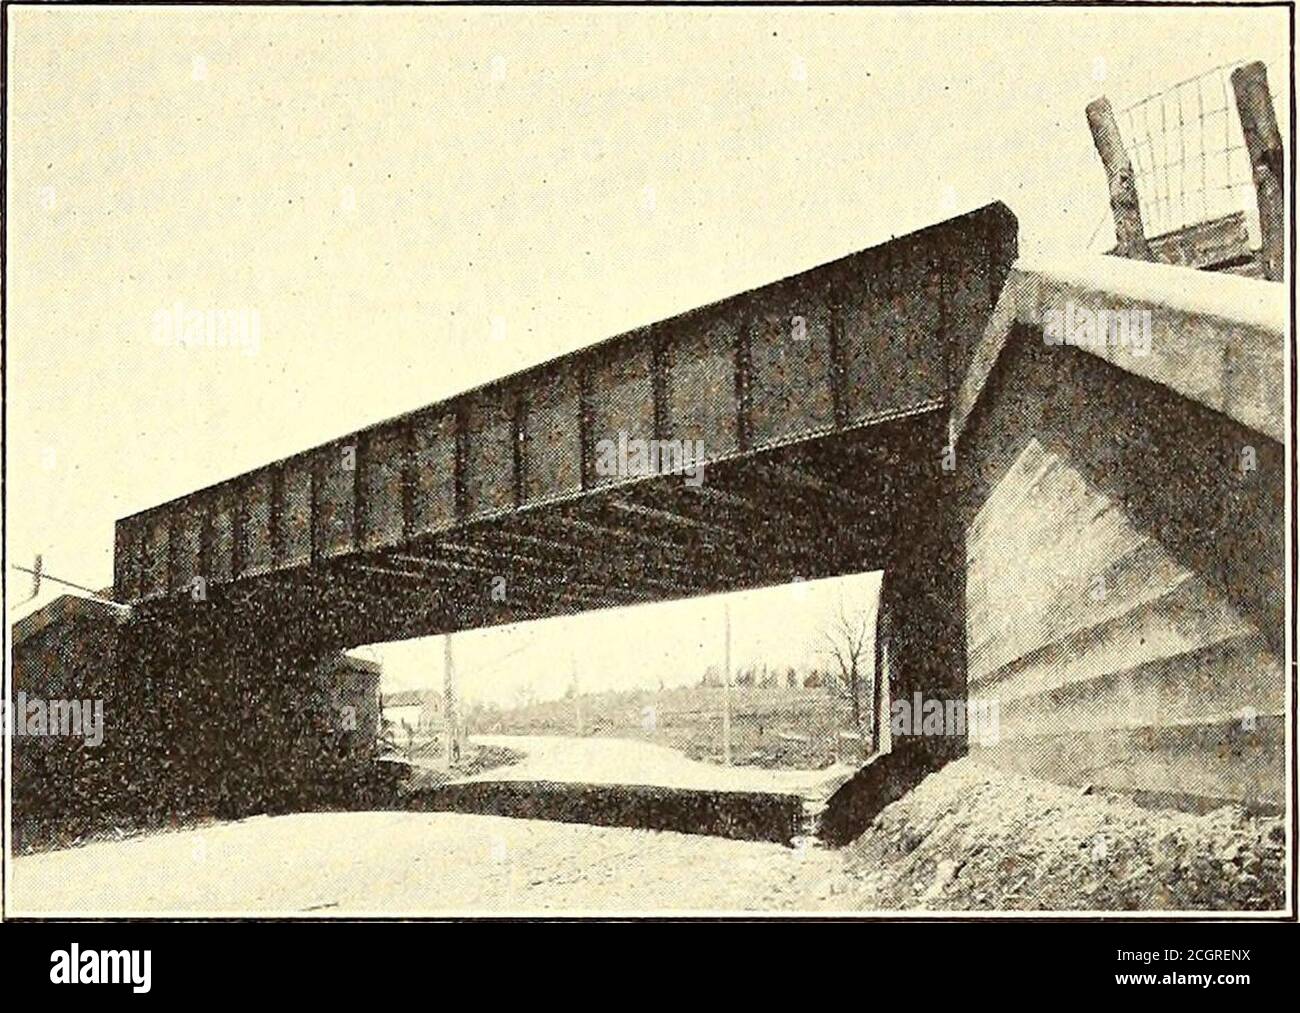 . The Street railway journal . HIGHWAY BRIDGE AT ARDMORE AVENUE, SHOWING ALSO THE DOUBLE-POLE CONSTRUCTION AT CROSSINGS WITH FOREIGN WIRES of which a considerable proportion is disintegrating mica.The company is sowing alfalfa on all of its fills to securea good binder and enhance the appearance of the right ofway, in favorable contrast to the cinder-covered roadwayof steam railroads. The largest cut is 500 ft. west of the power station.It is 600 ft. long and has a maximum depth of 40 ft, and required the removal of 20,000 cu. yds. of granite. Thebiggest fill is located over the old Conestoga Stock Photo